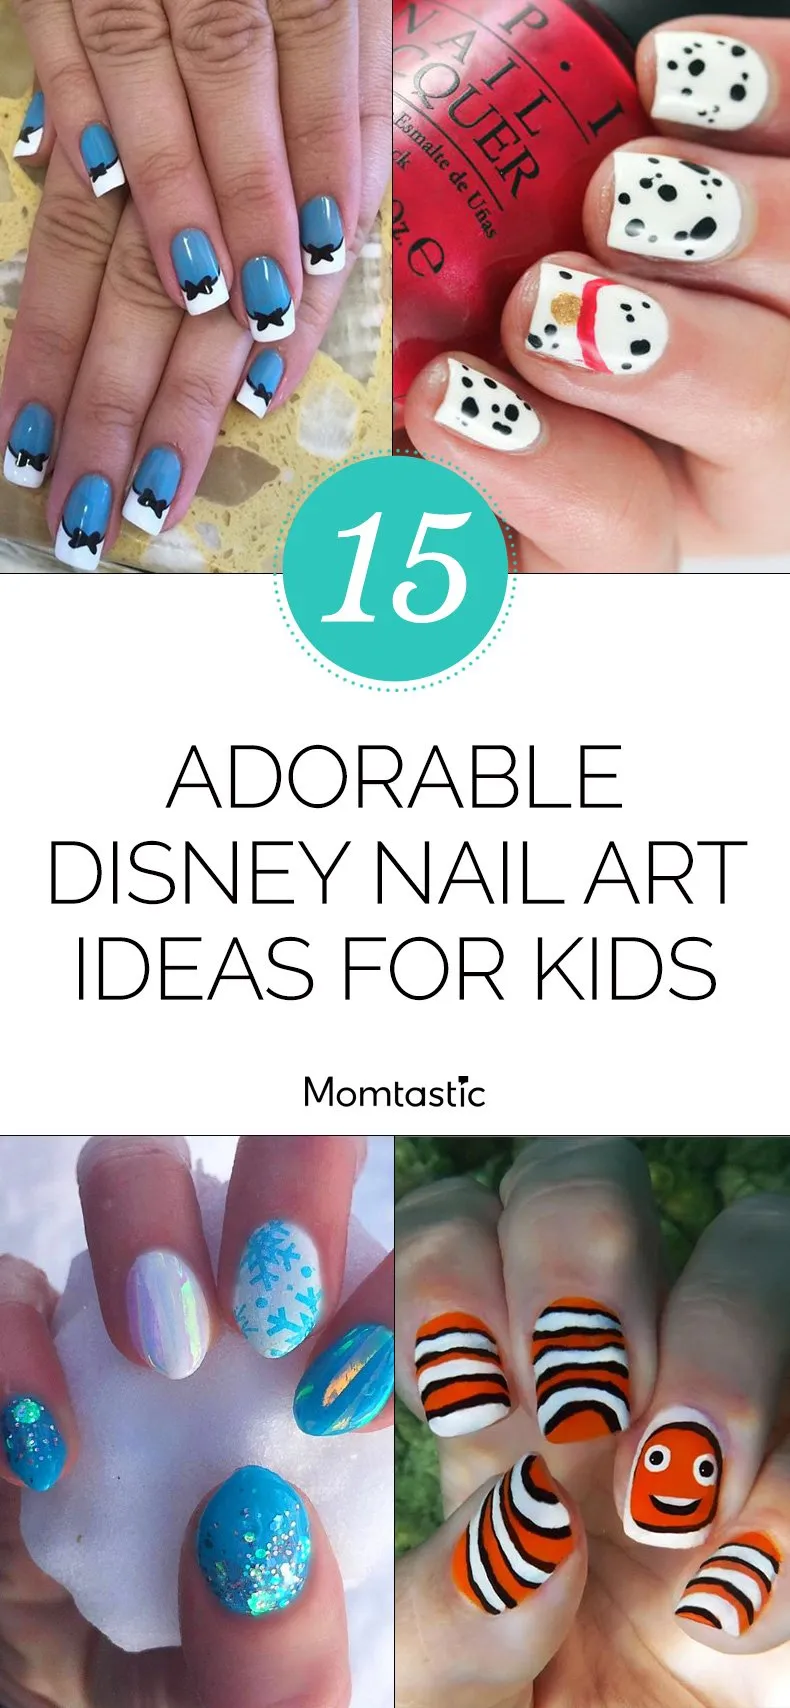 Disney Princess Swirl Nails Pictures, Photos, and Images for Facebook,  Tumblr, Pinterest, and Twitter